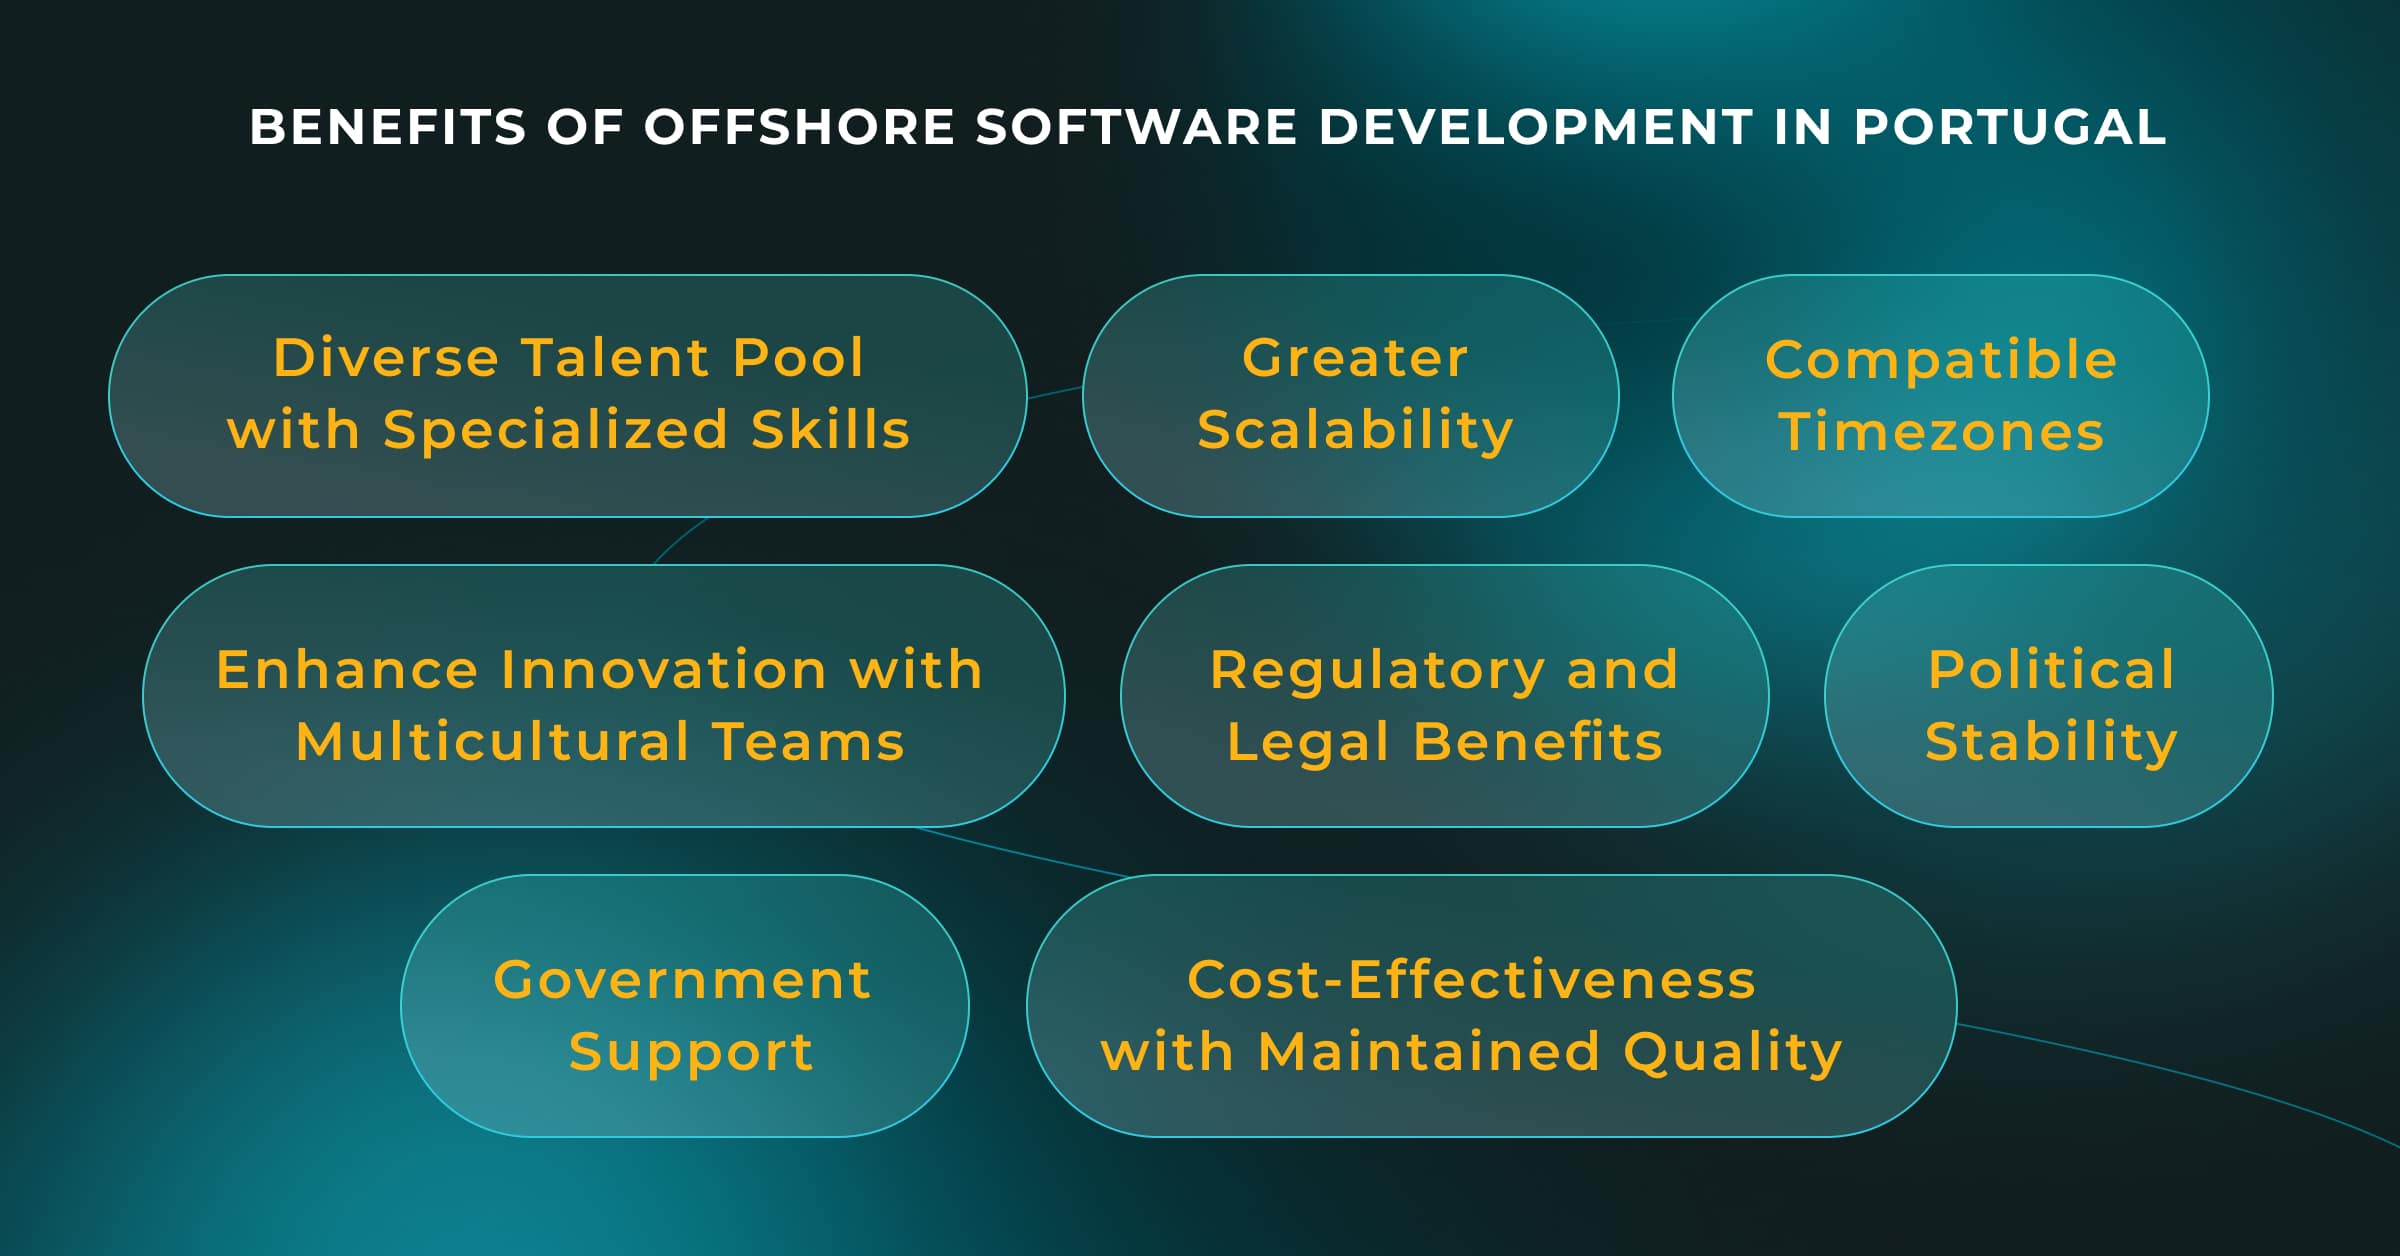 Benefits of Offshore Software Development in Portugal